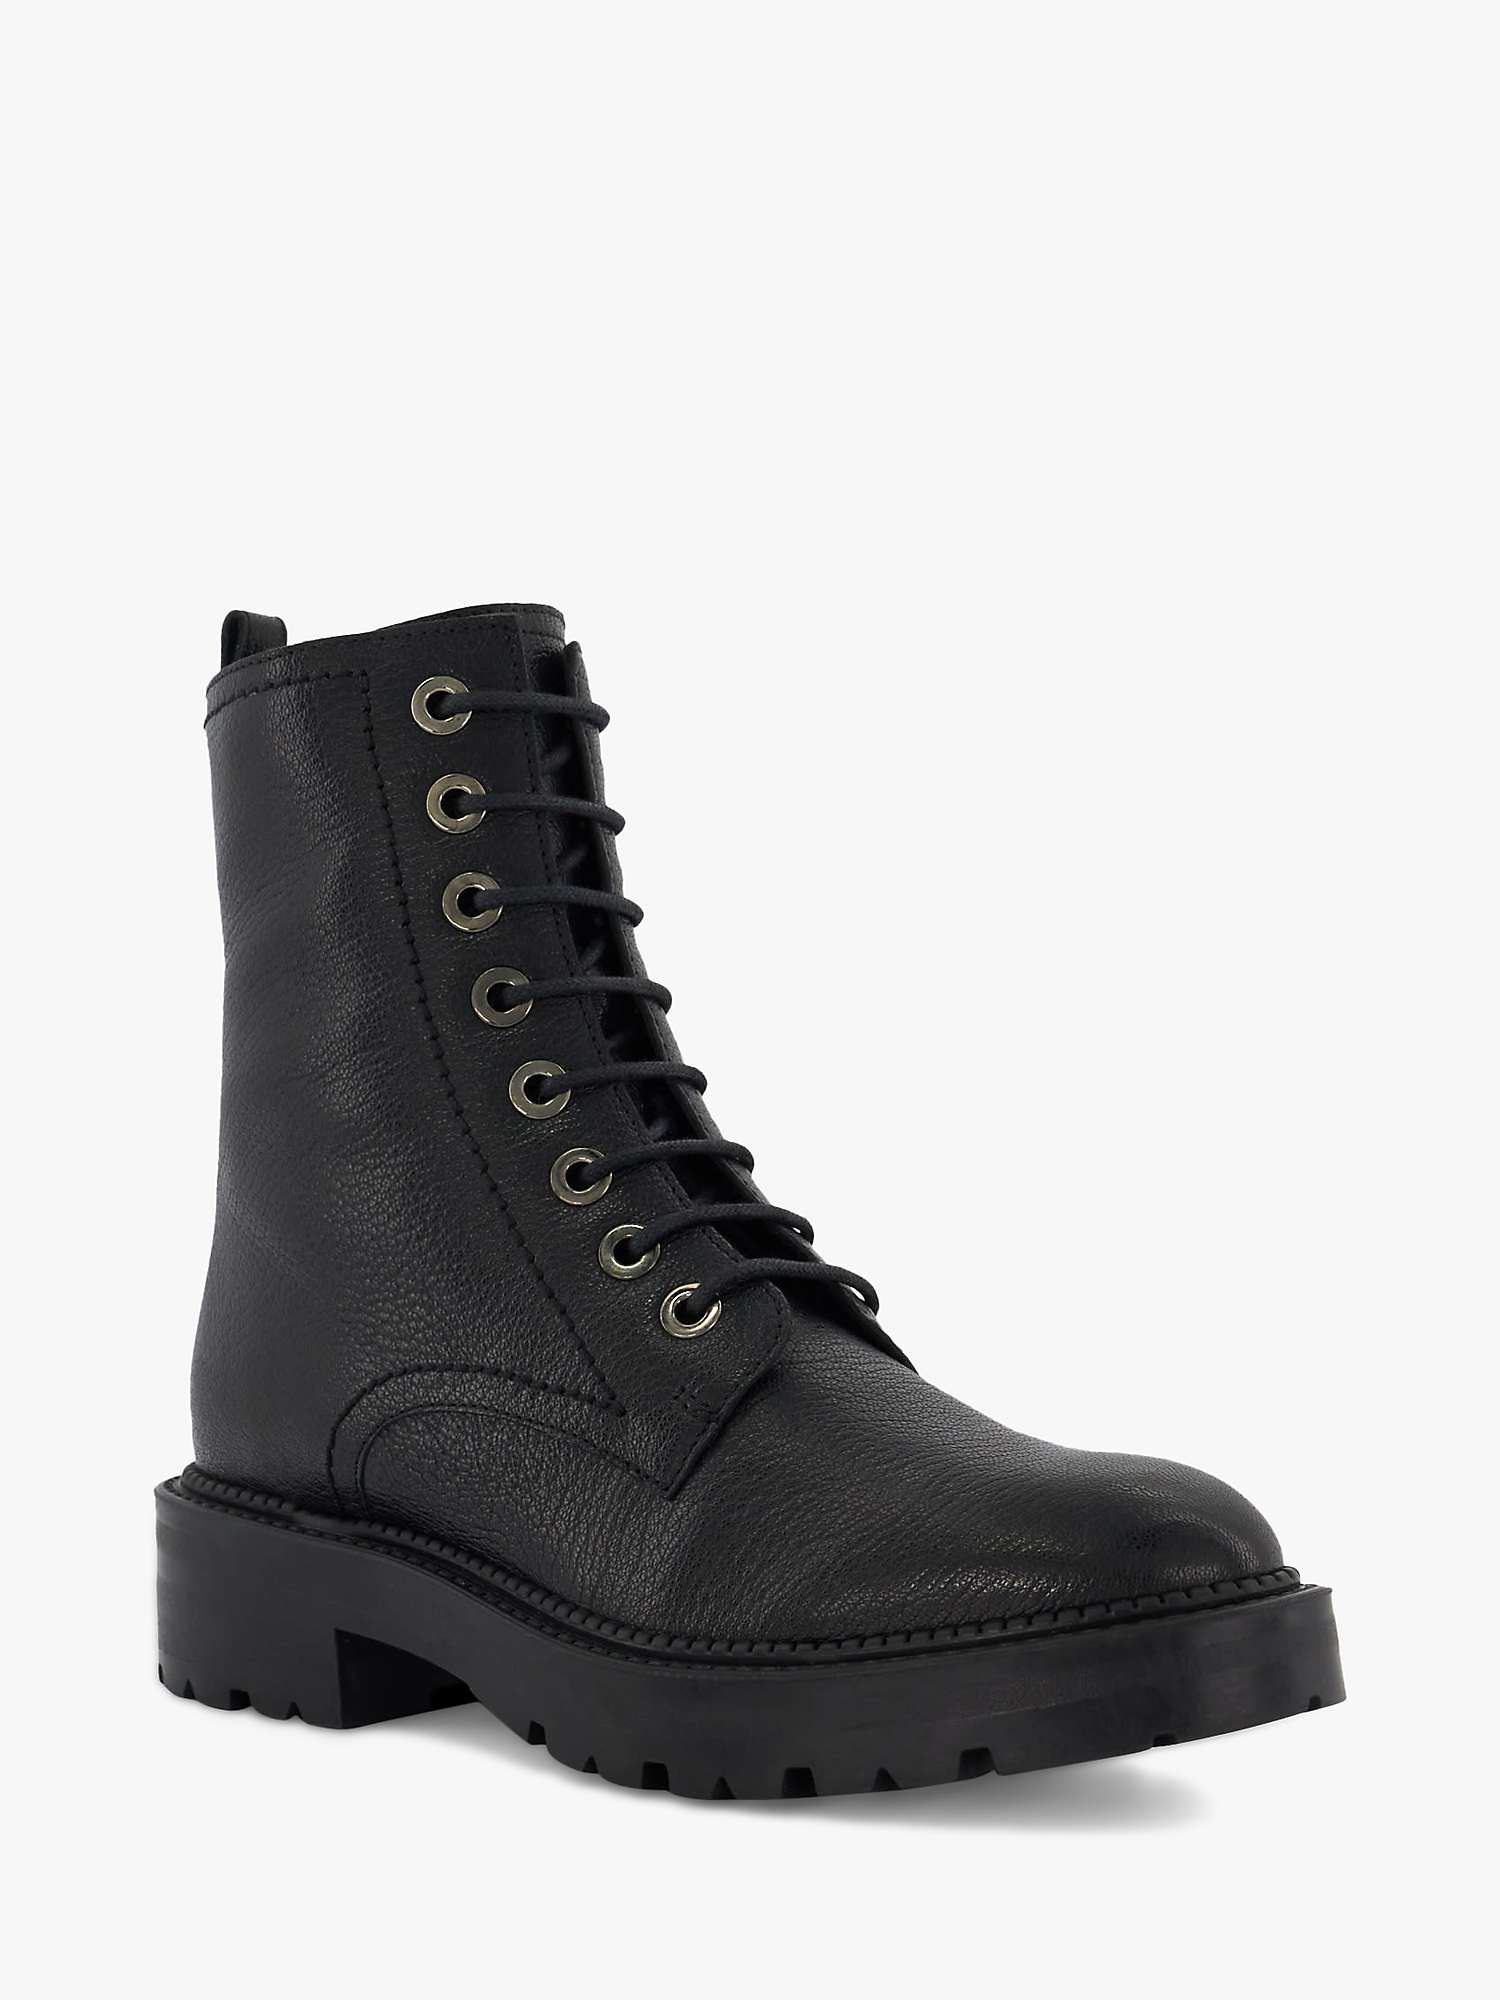 Buy Dune Press Embossed Leather Ankle Boots, Black Online at johnlewis.com